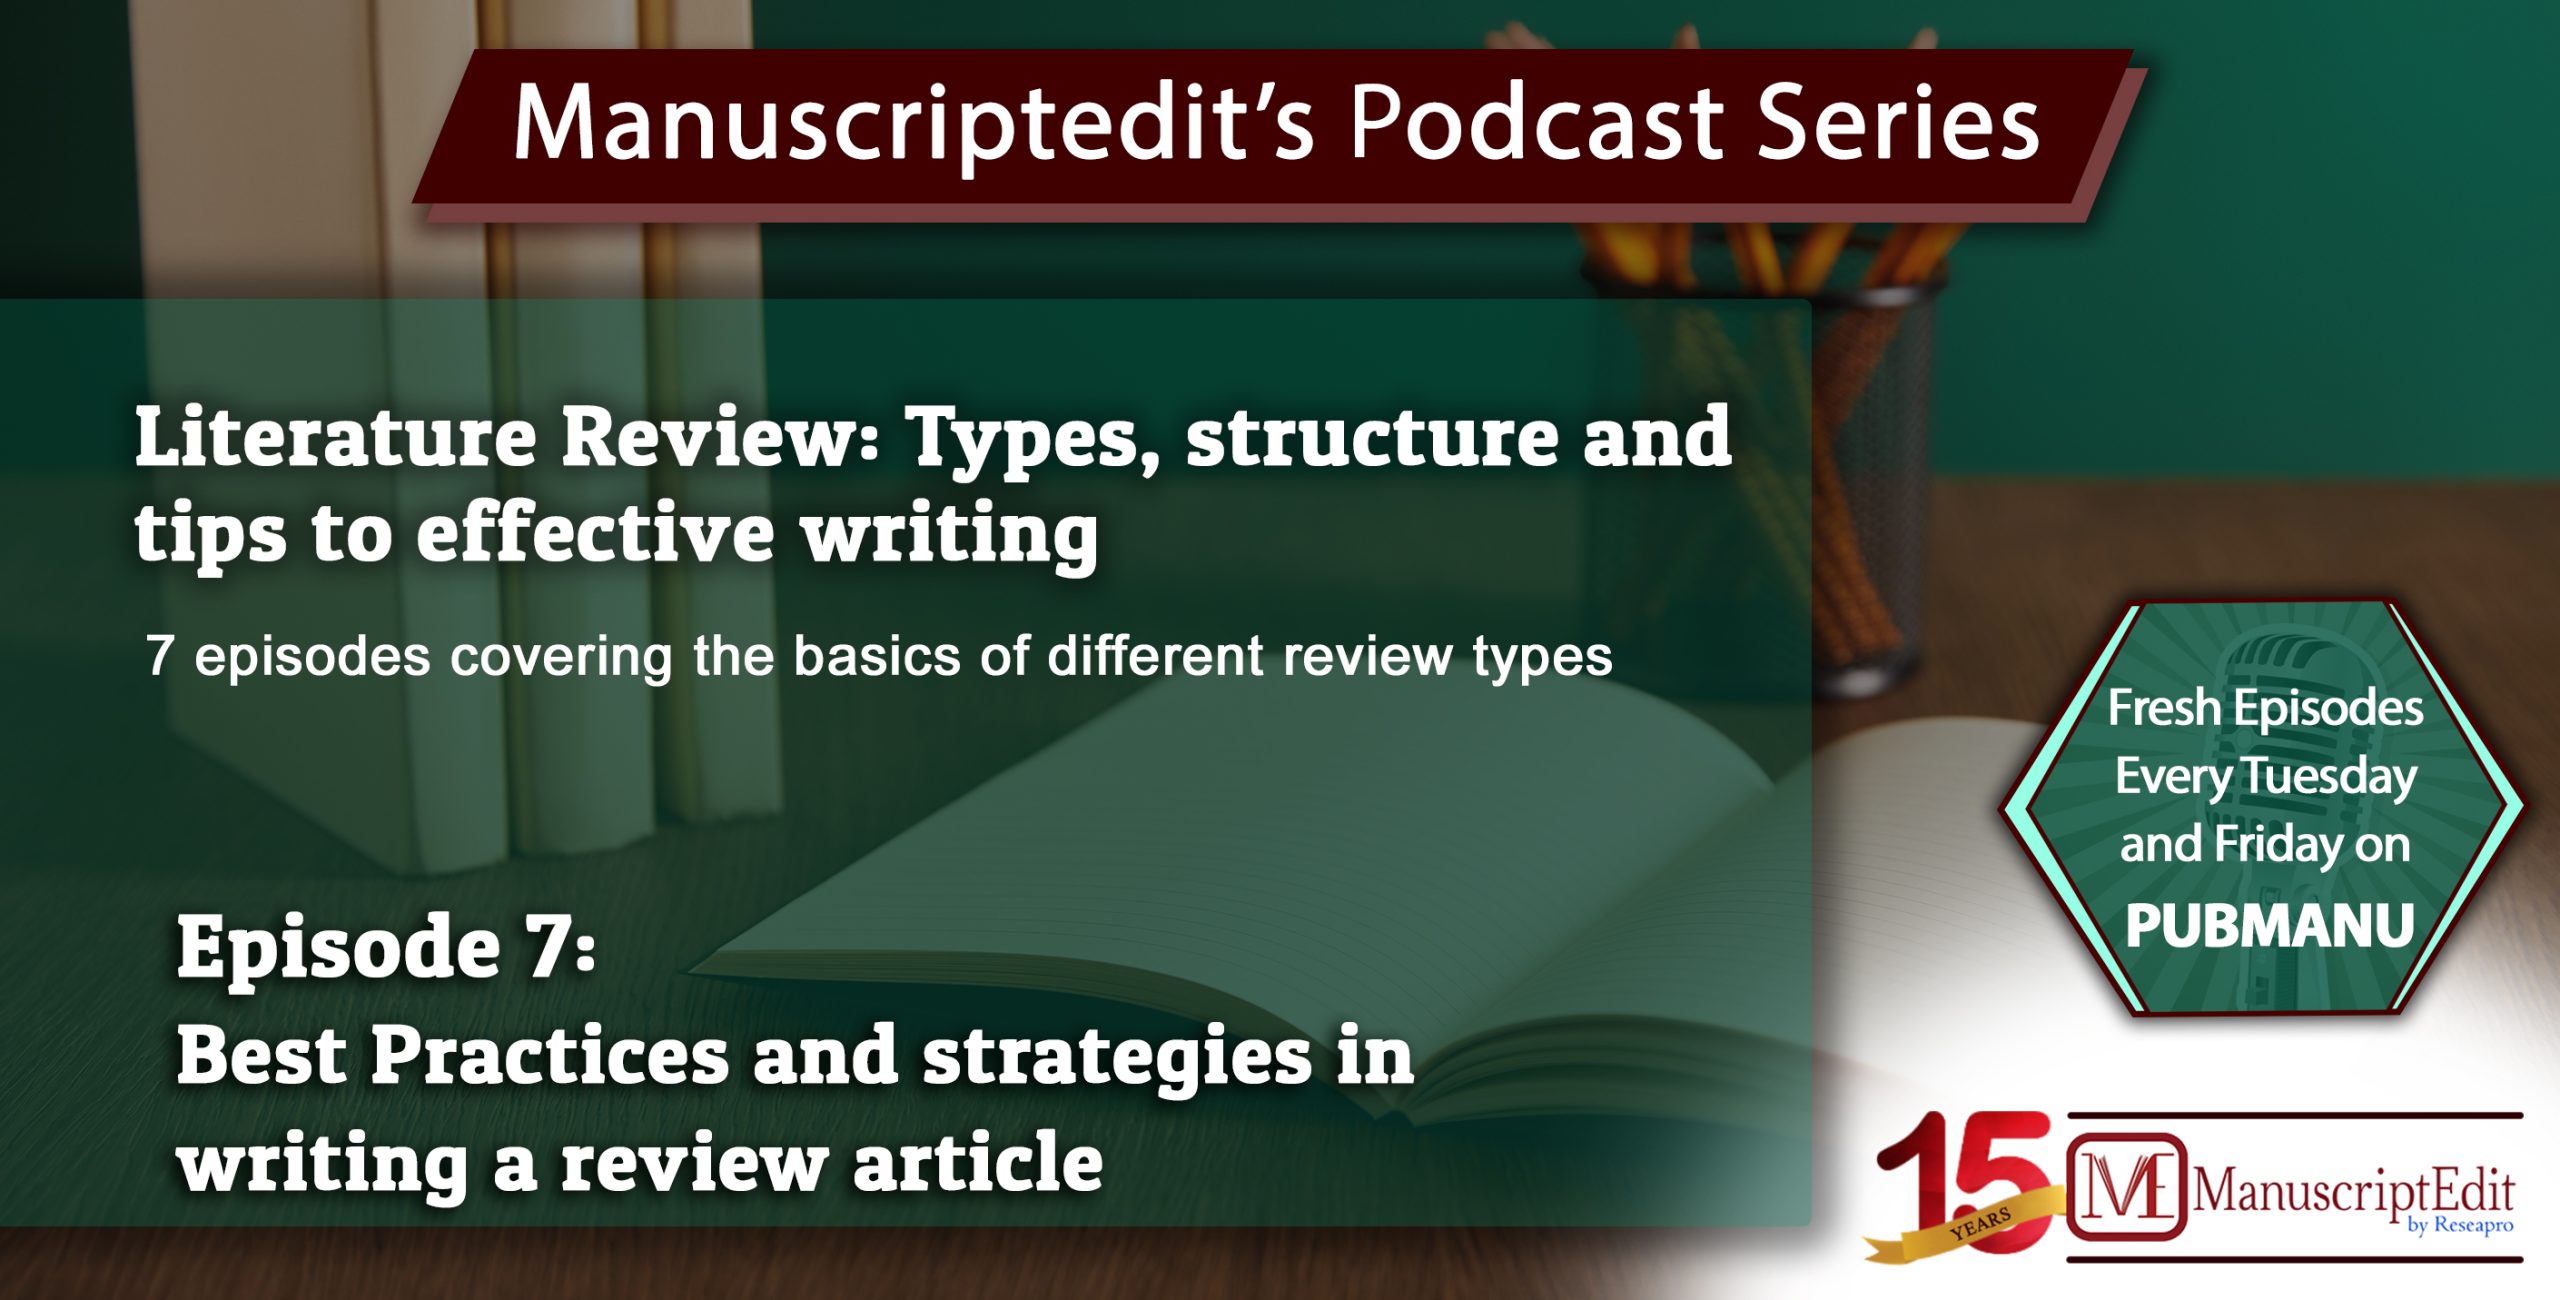 Episode 7: Best Practices and Strategies in Writing a Review Article